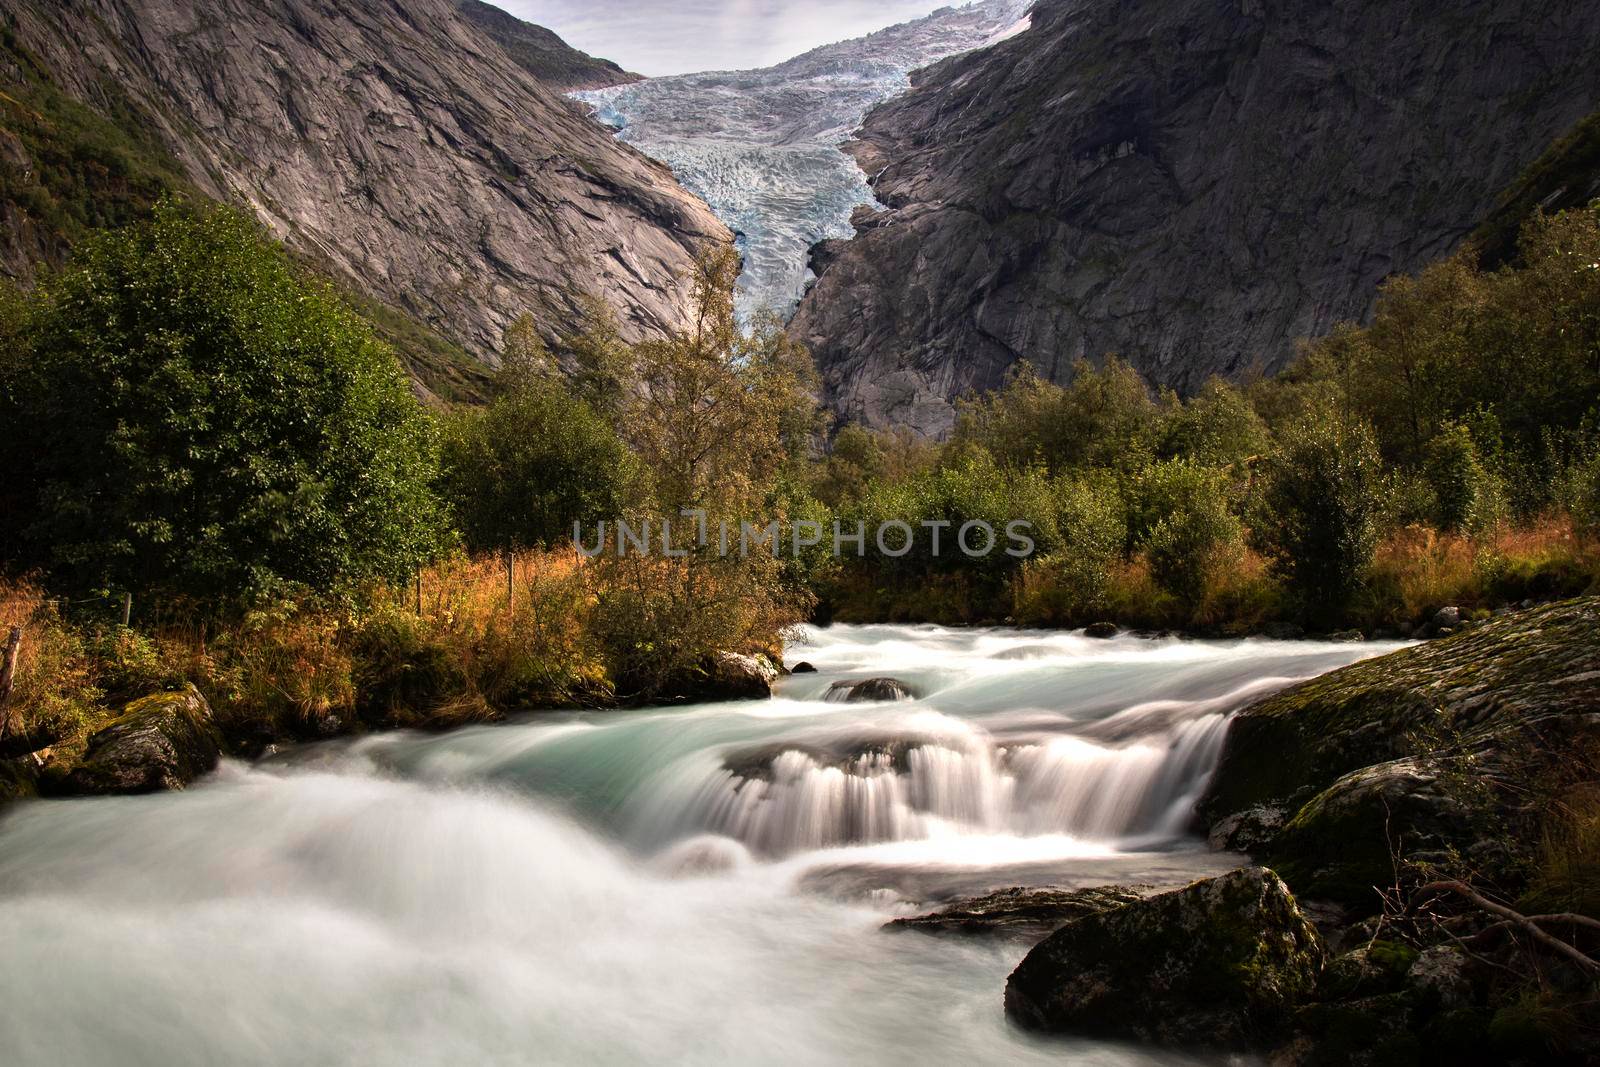 Landscape showing Briksdal glacier in a rocky valley with trees and a river in long exposure picture